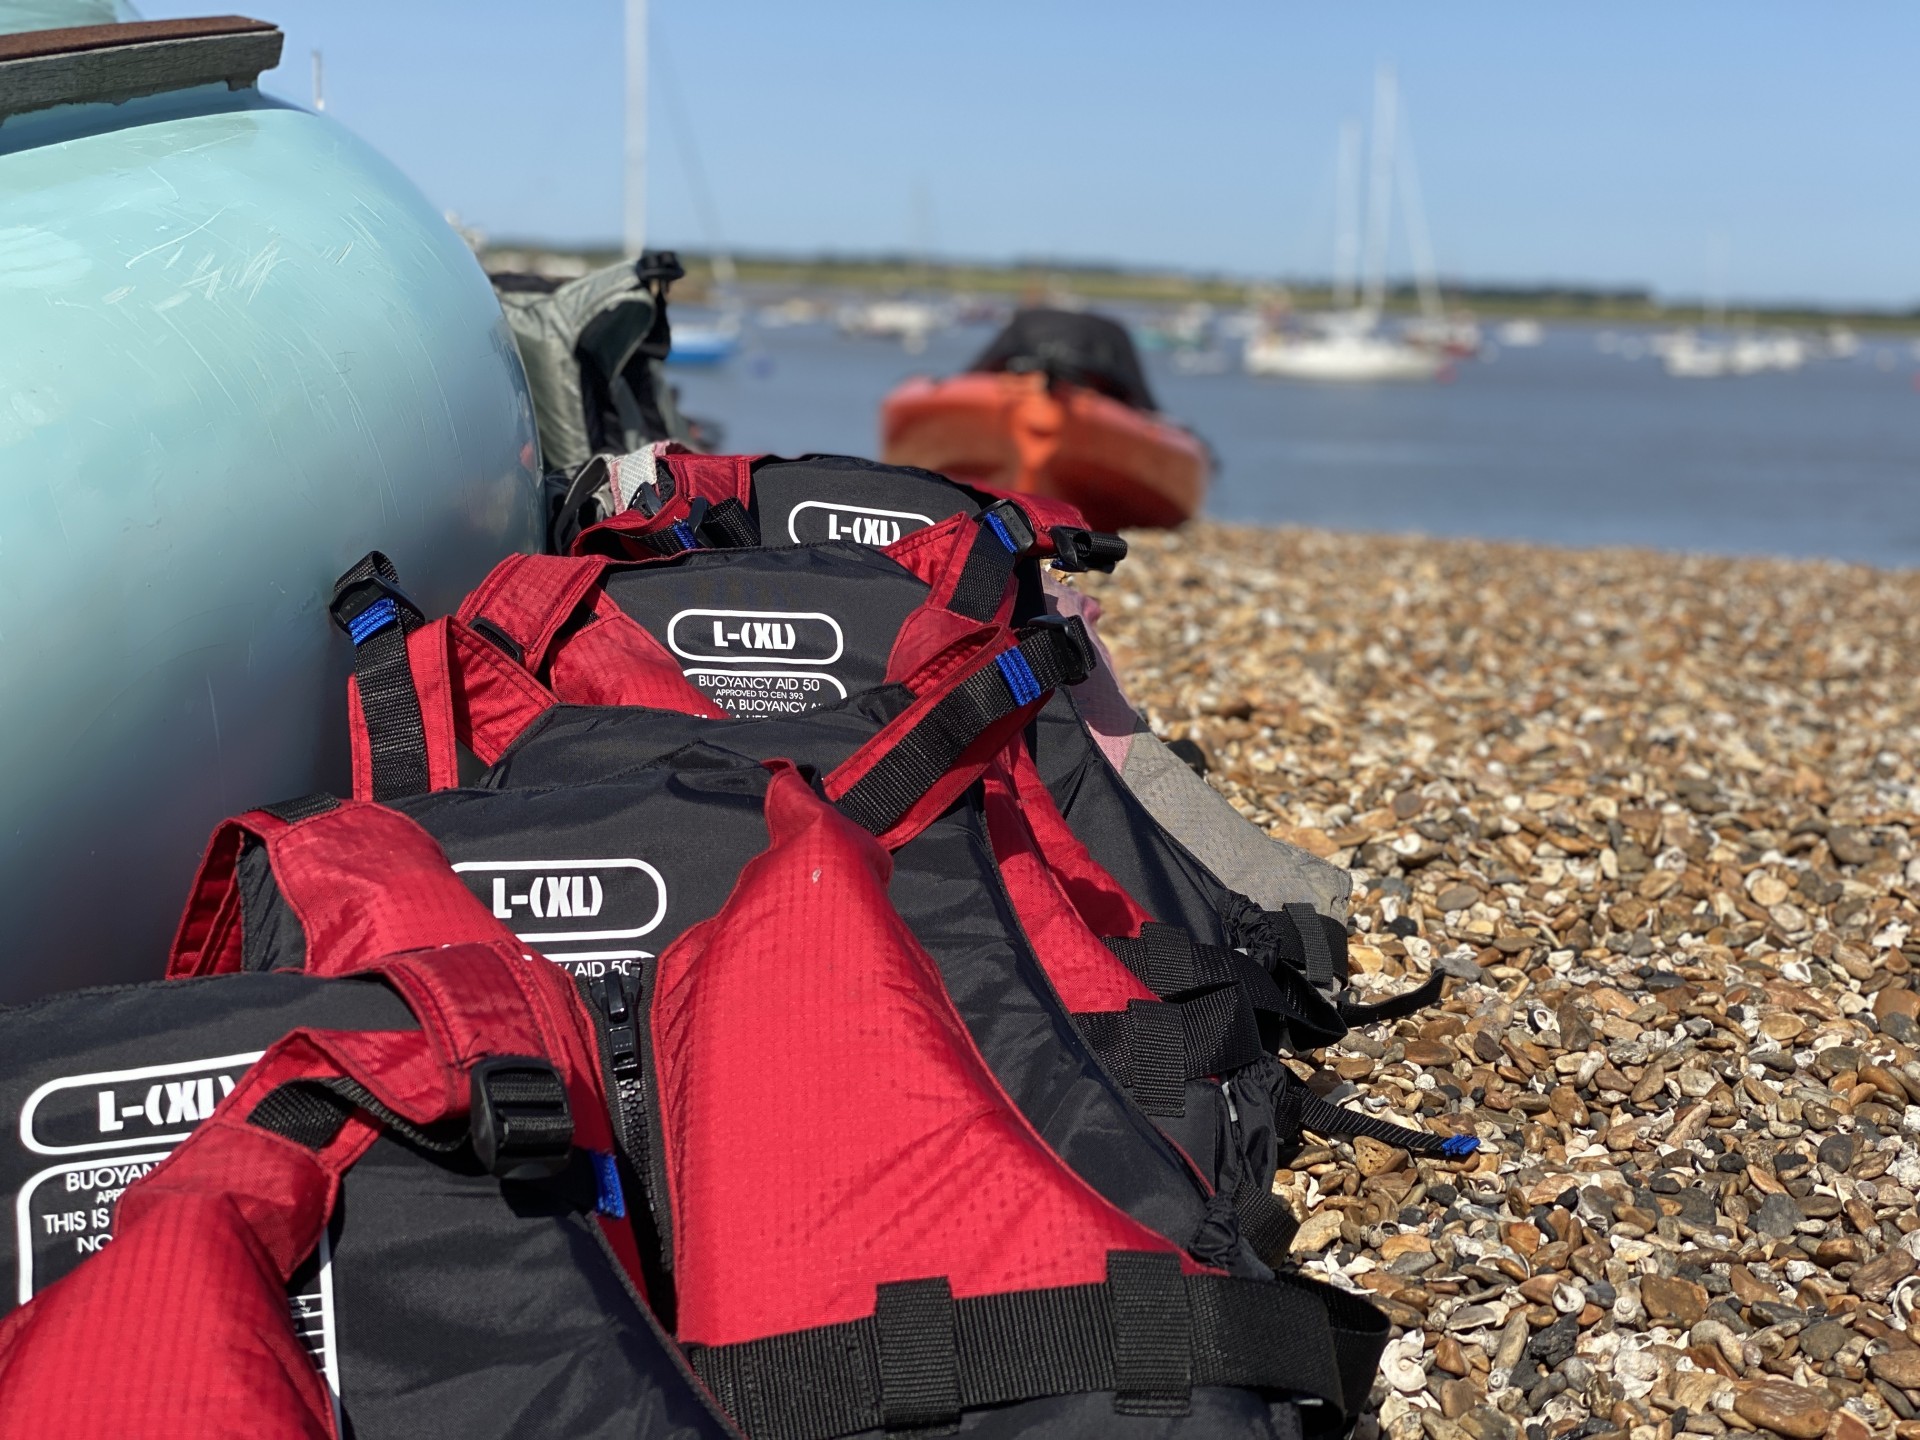 Red buoyancy aids lined up ready for use.